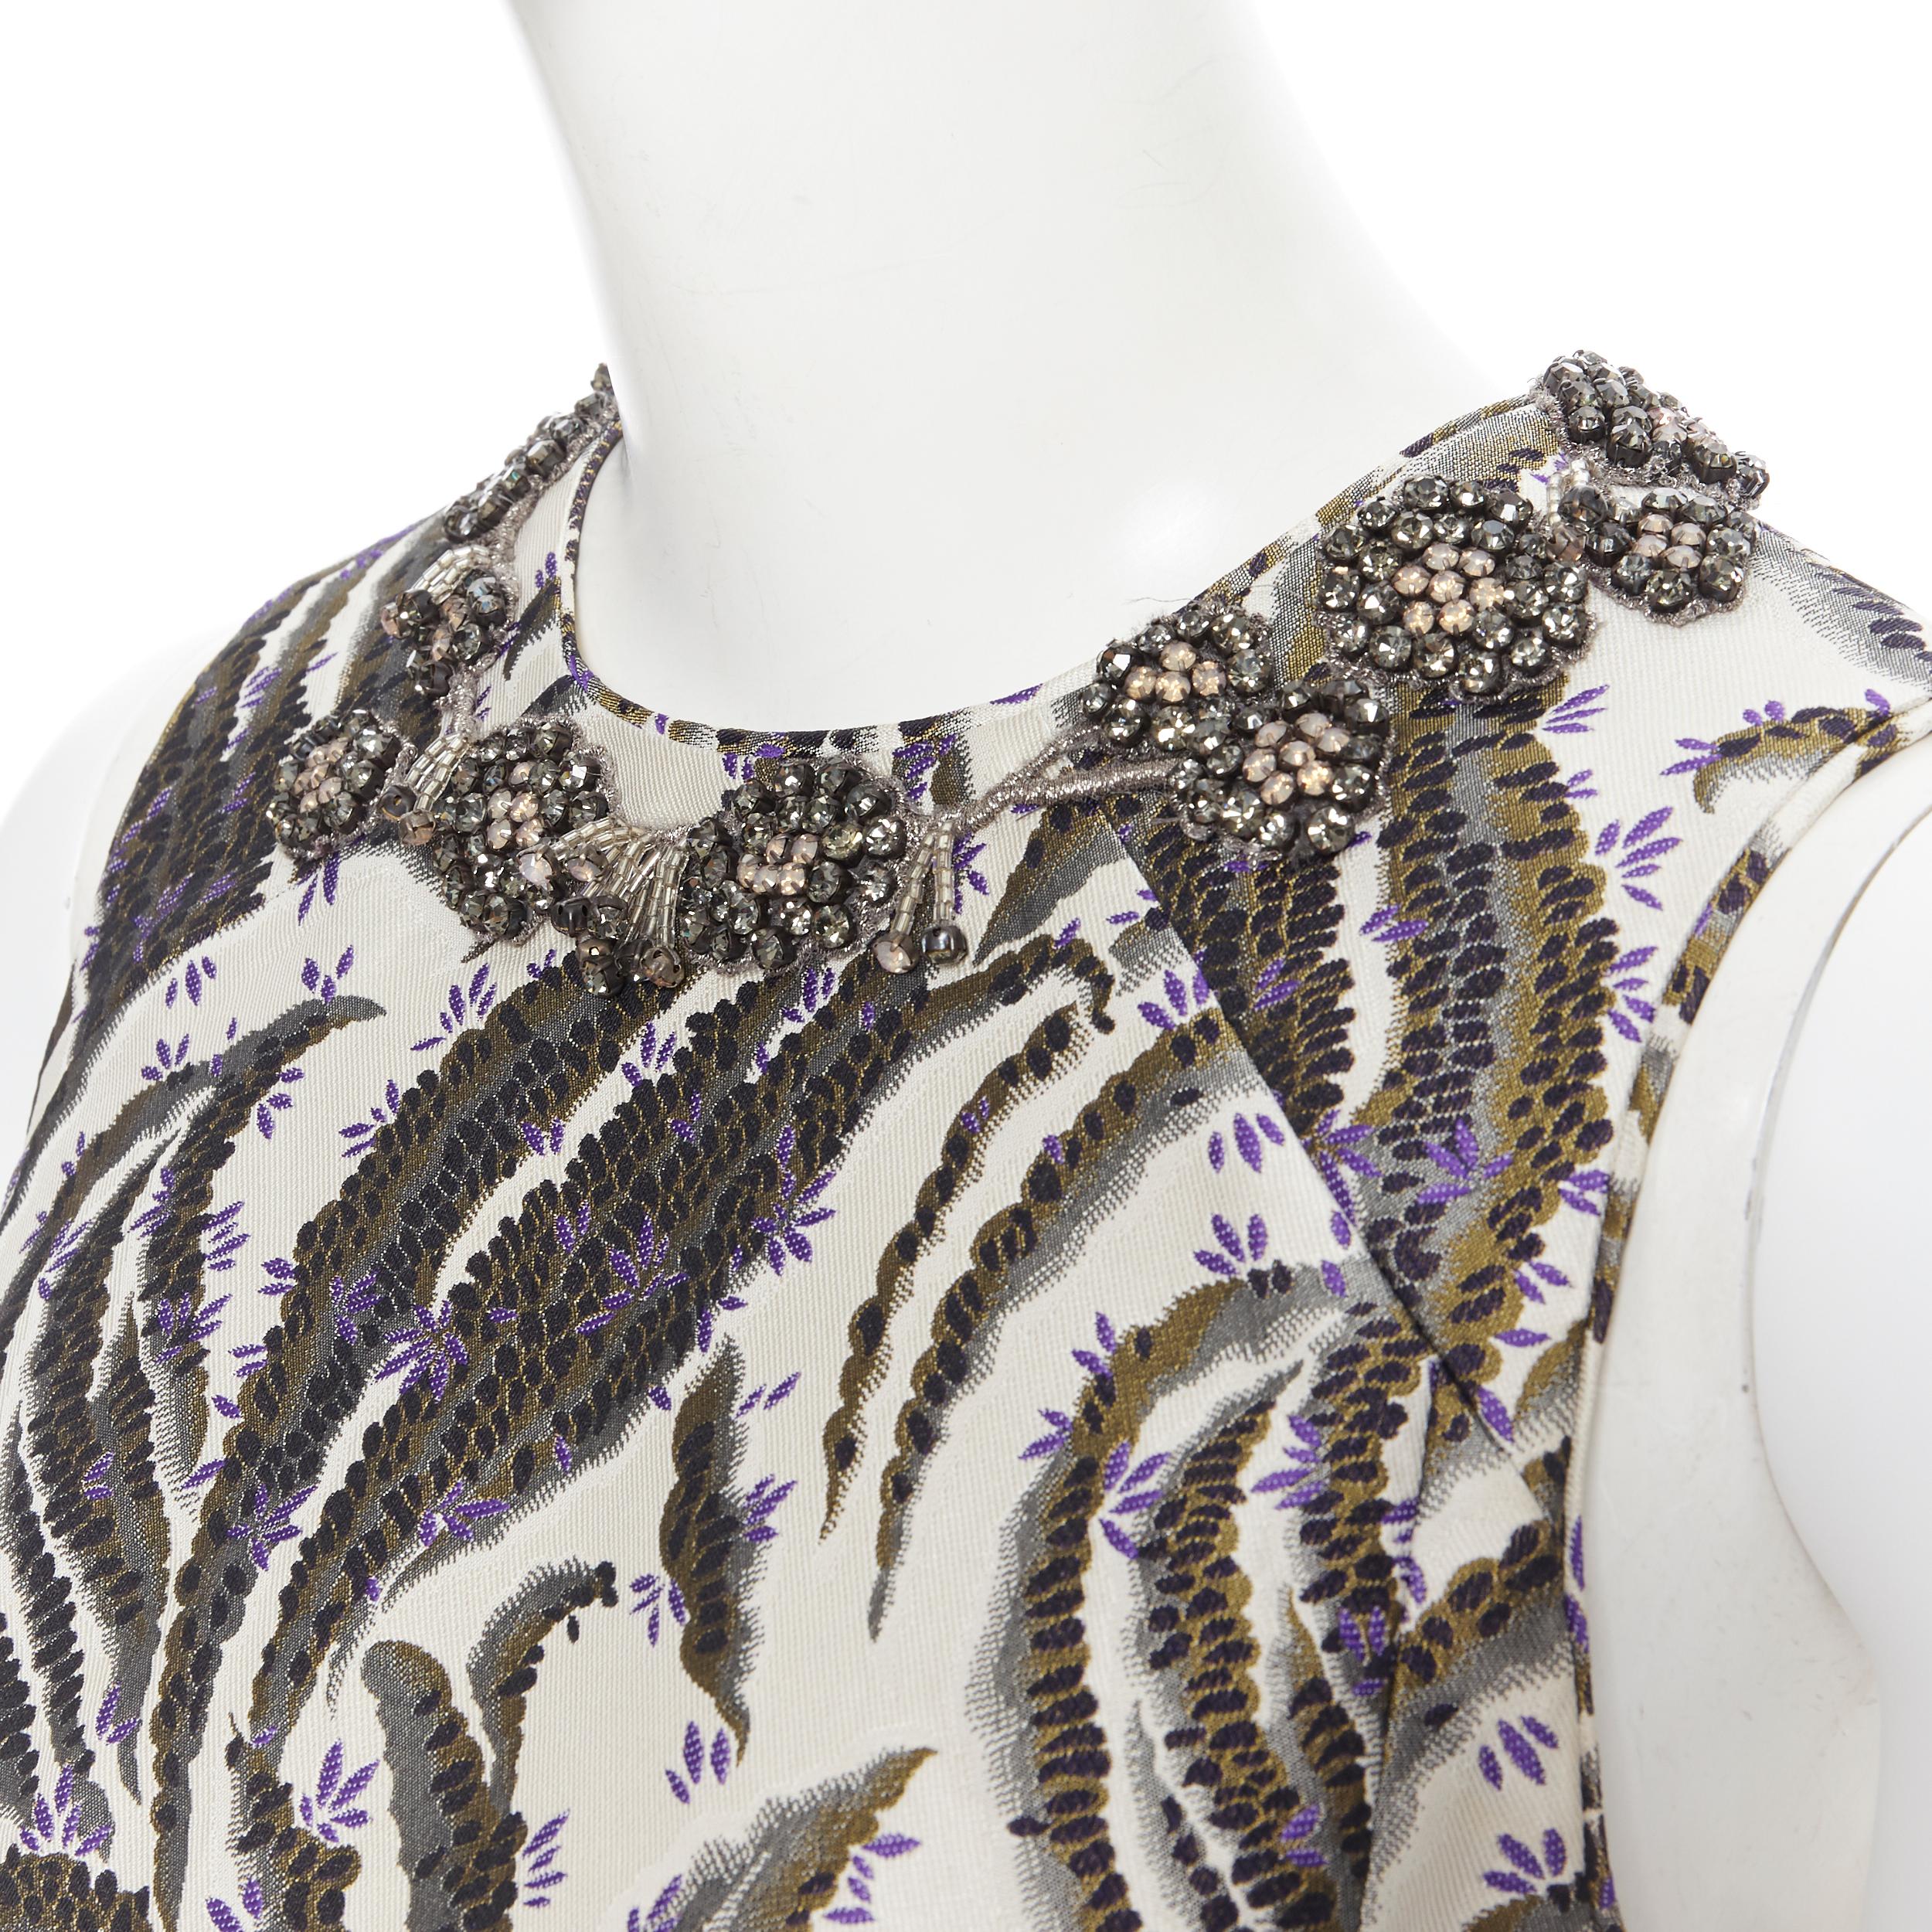 GIAMBATTISTA VALLI floral purple blossom jacquard crystal collar sheath dress XS 
Reference: LNKO/A01686 
Brand: Giambattista Valli 
Designer: Giambattista Valli 
Collection: 2016 
Material: Polyester 
Color: Beige 
Pattern: Floral 
Closure: Zip